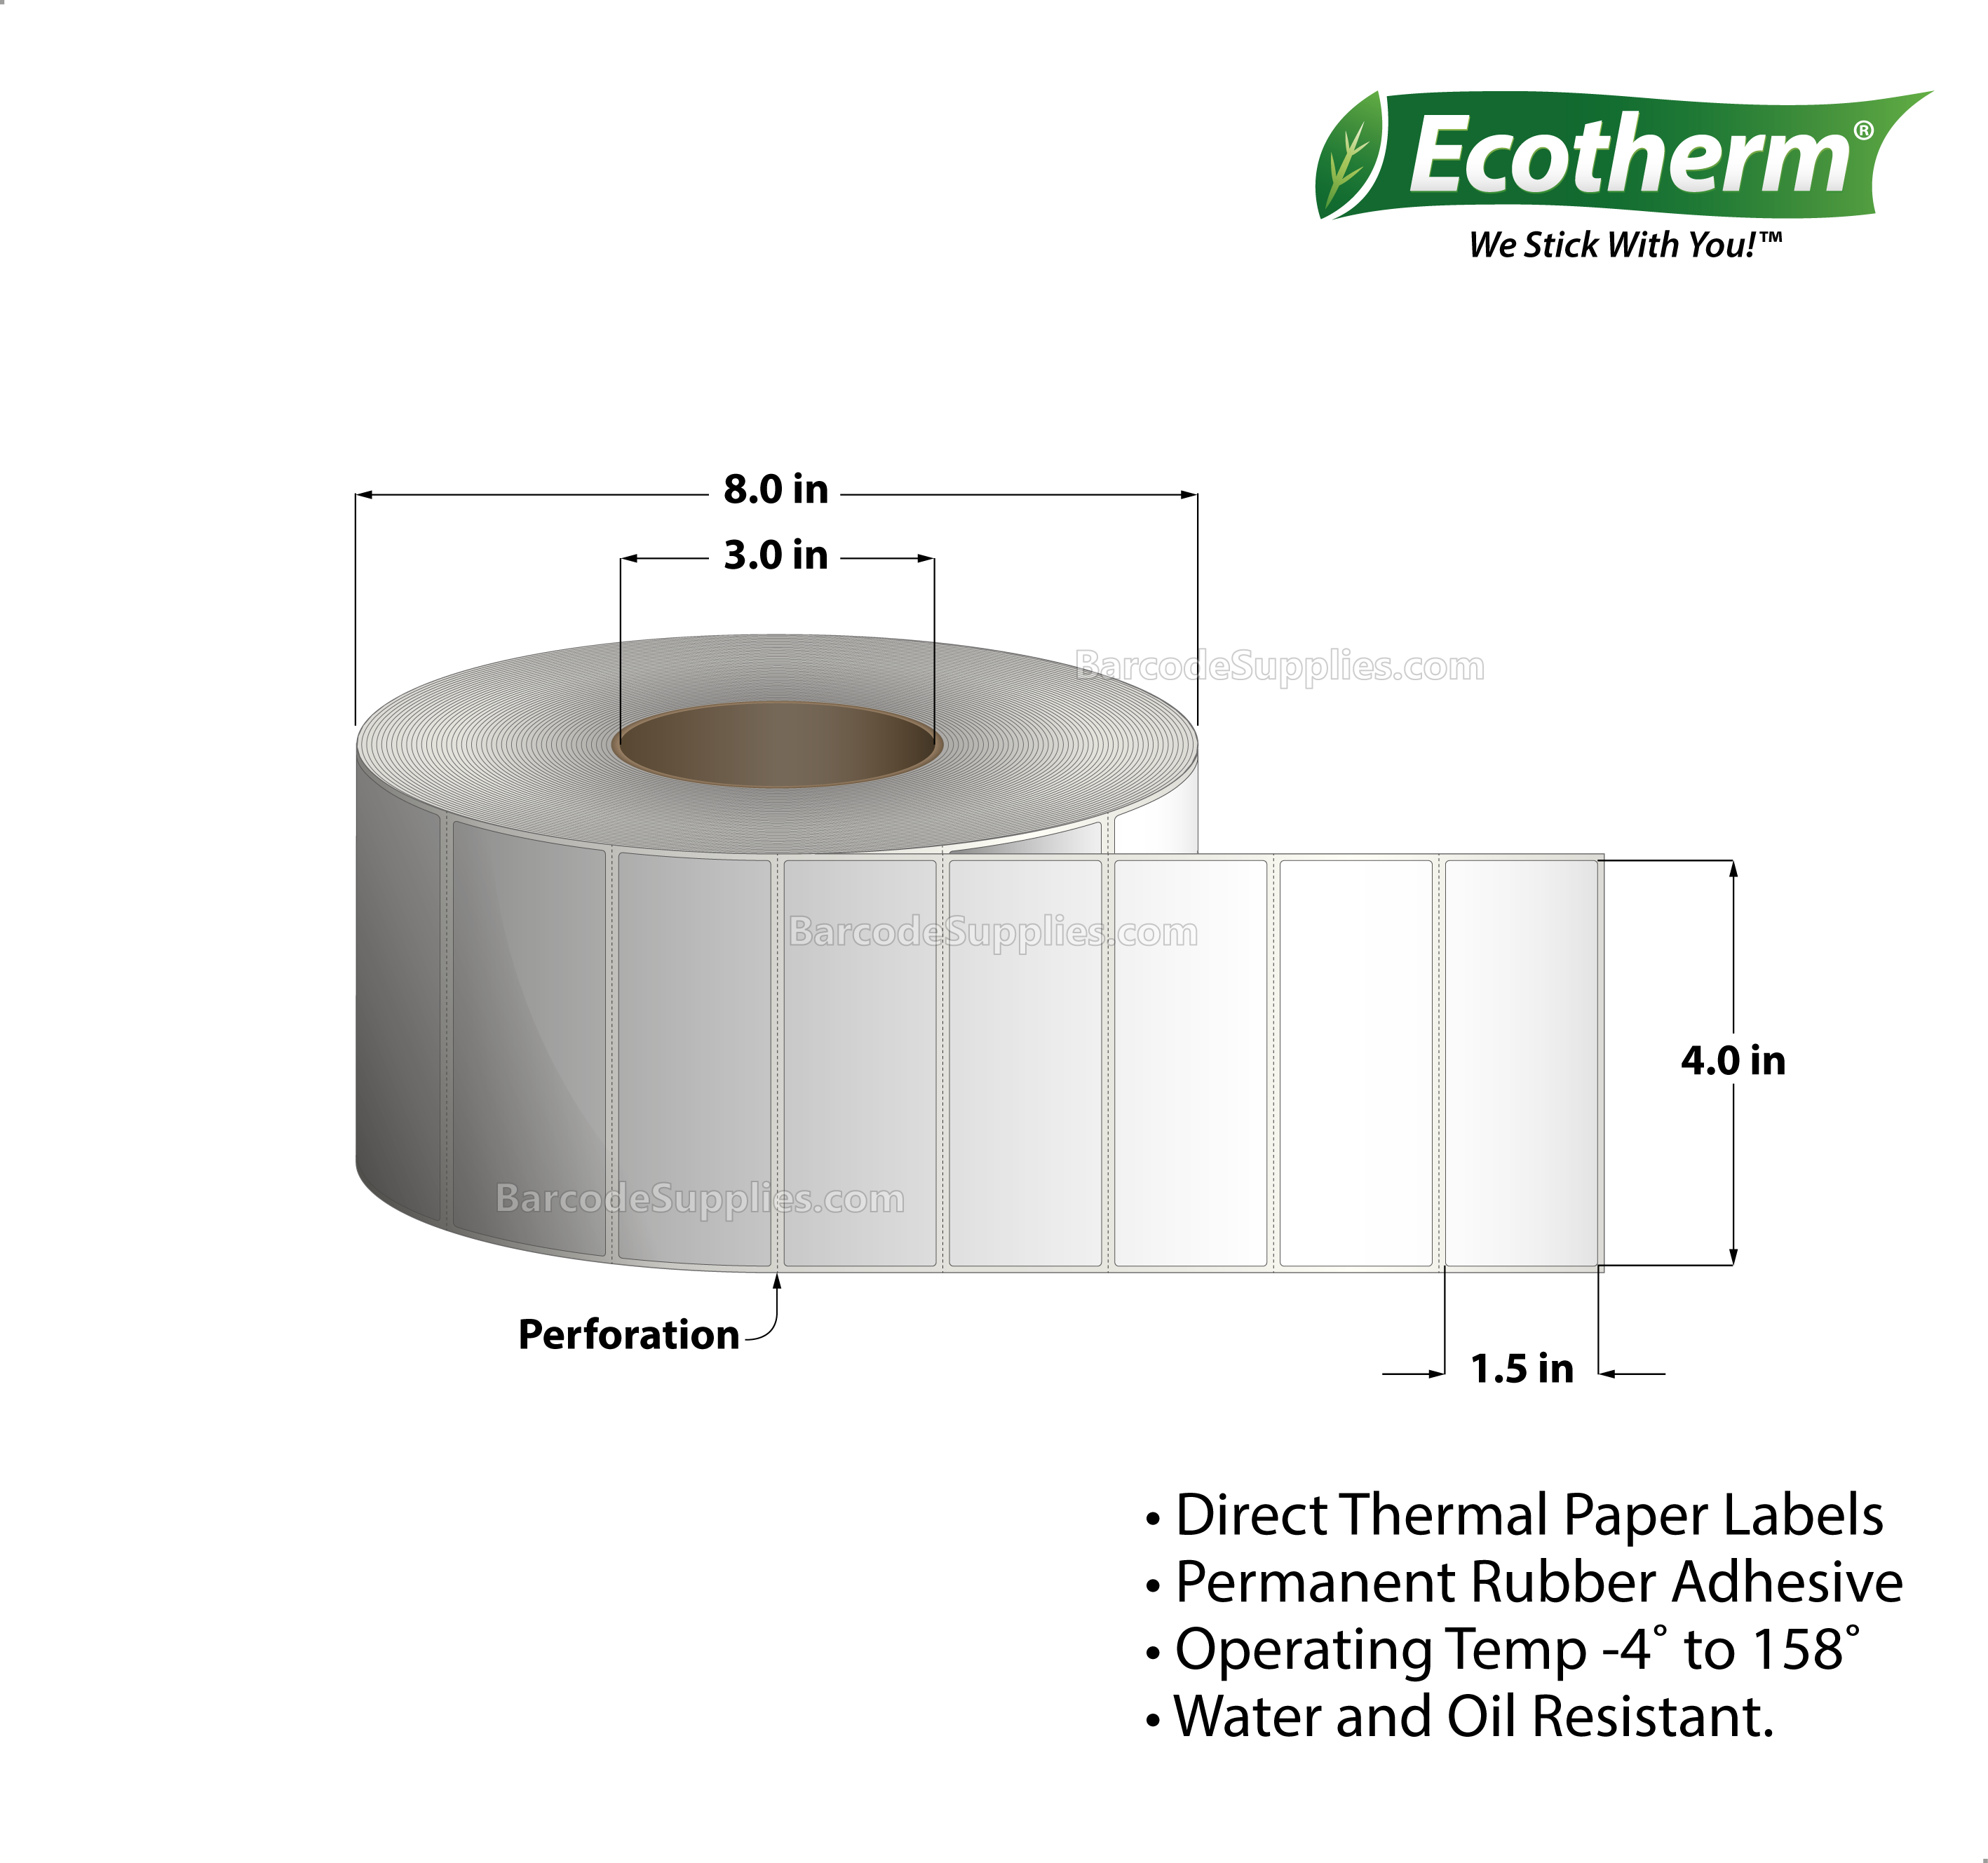 Products 4 x 1.5 Thermal Transfer White Labels With Rubber Adhesive - Perforated - 3850 Labels Per Roll - Carton Of 1 Rolls - 3850 Labels Total - MPN: ECOTHERM28135-1